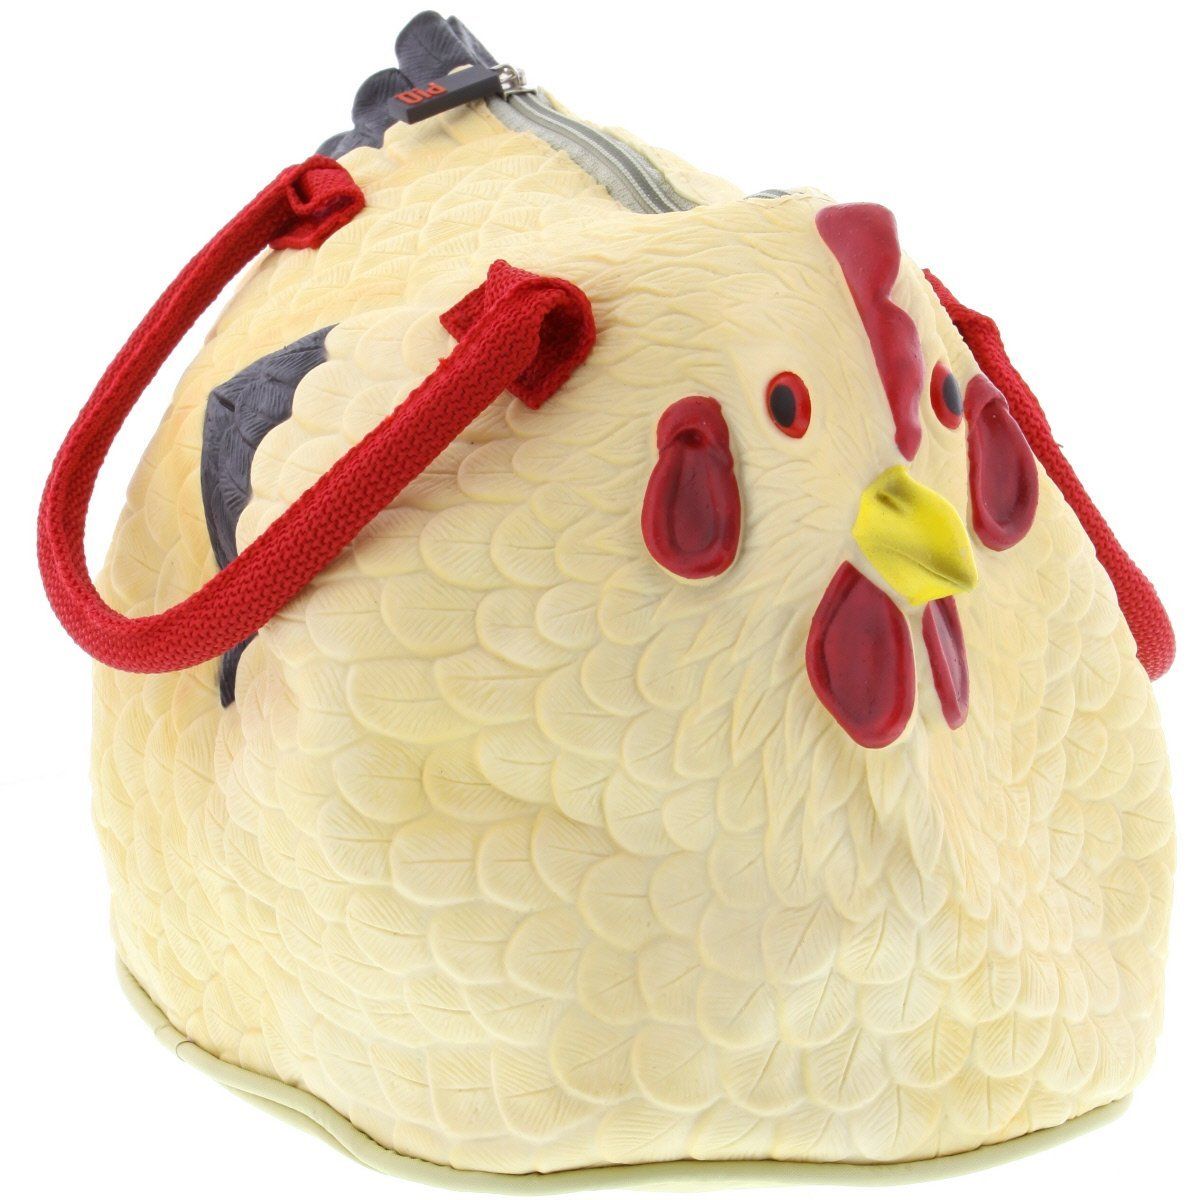 This Rubber Chicken Purse Will Exceed All Of Your Fashion Egg-spectations